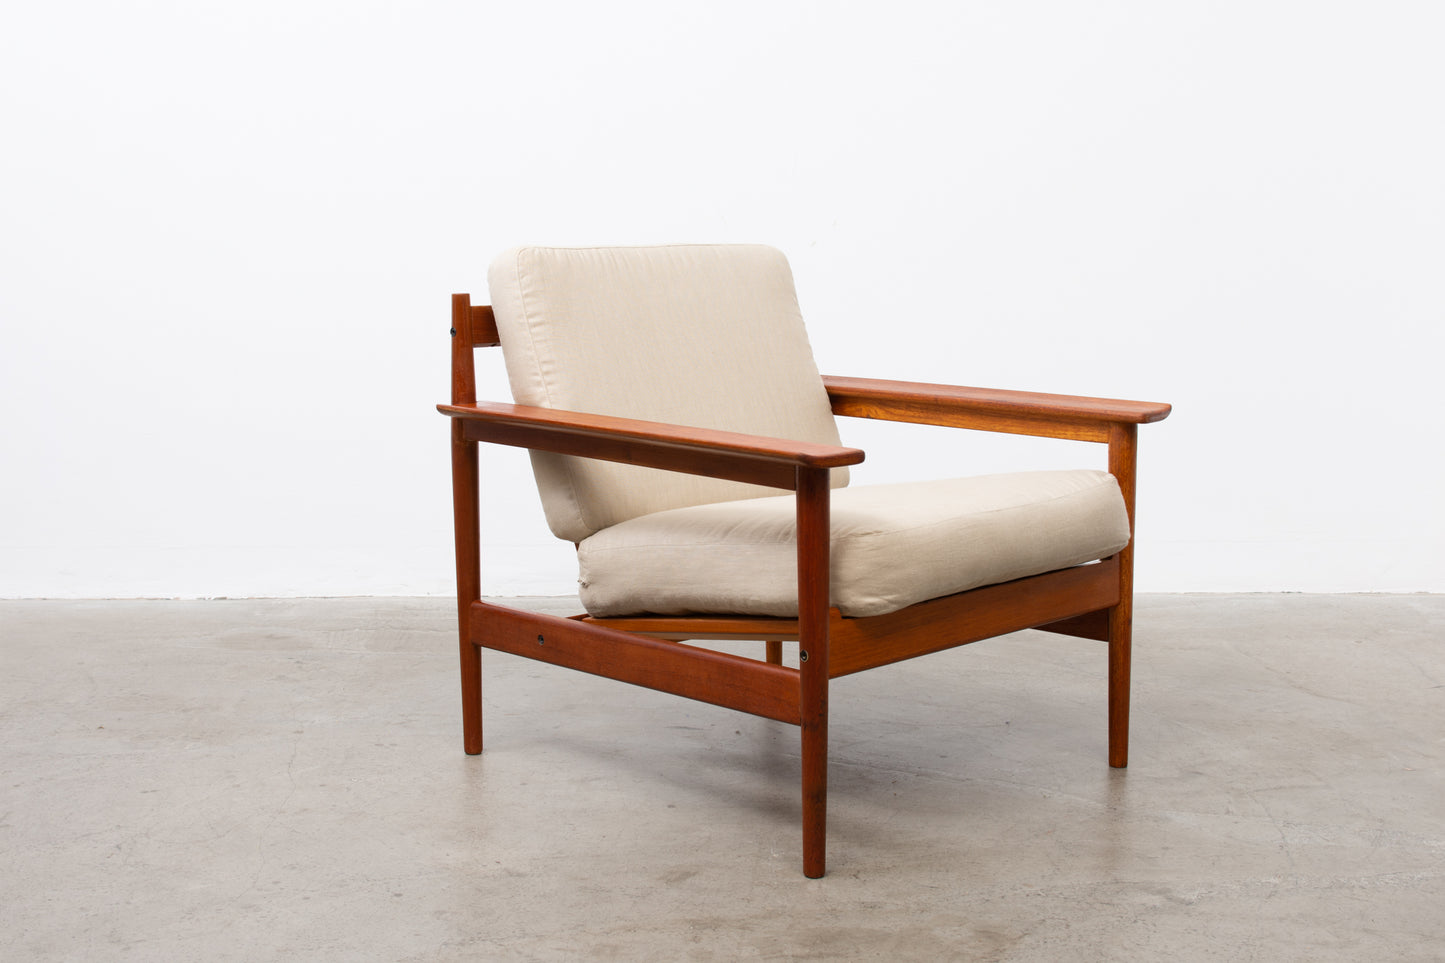 1960s teak lounger with linen cushions